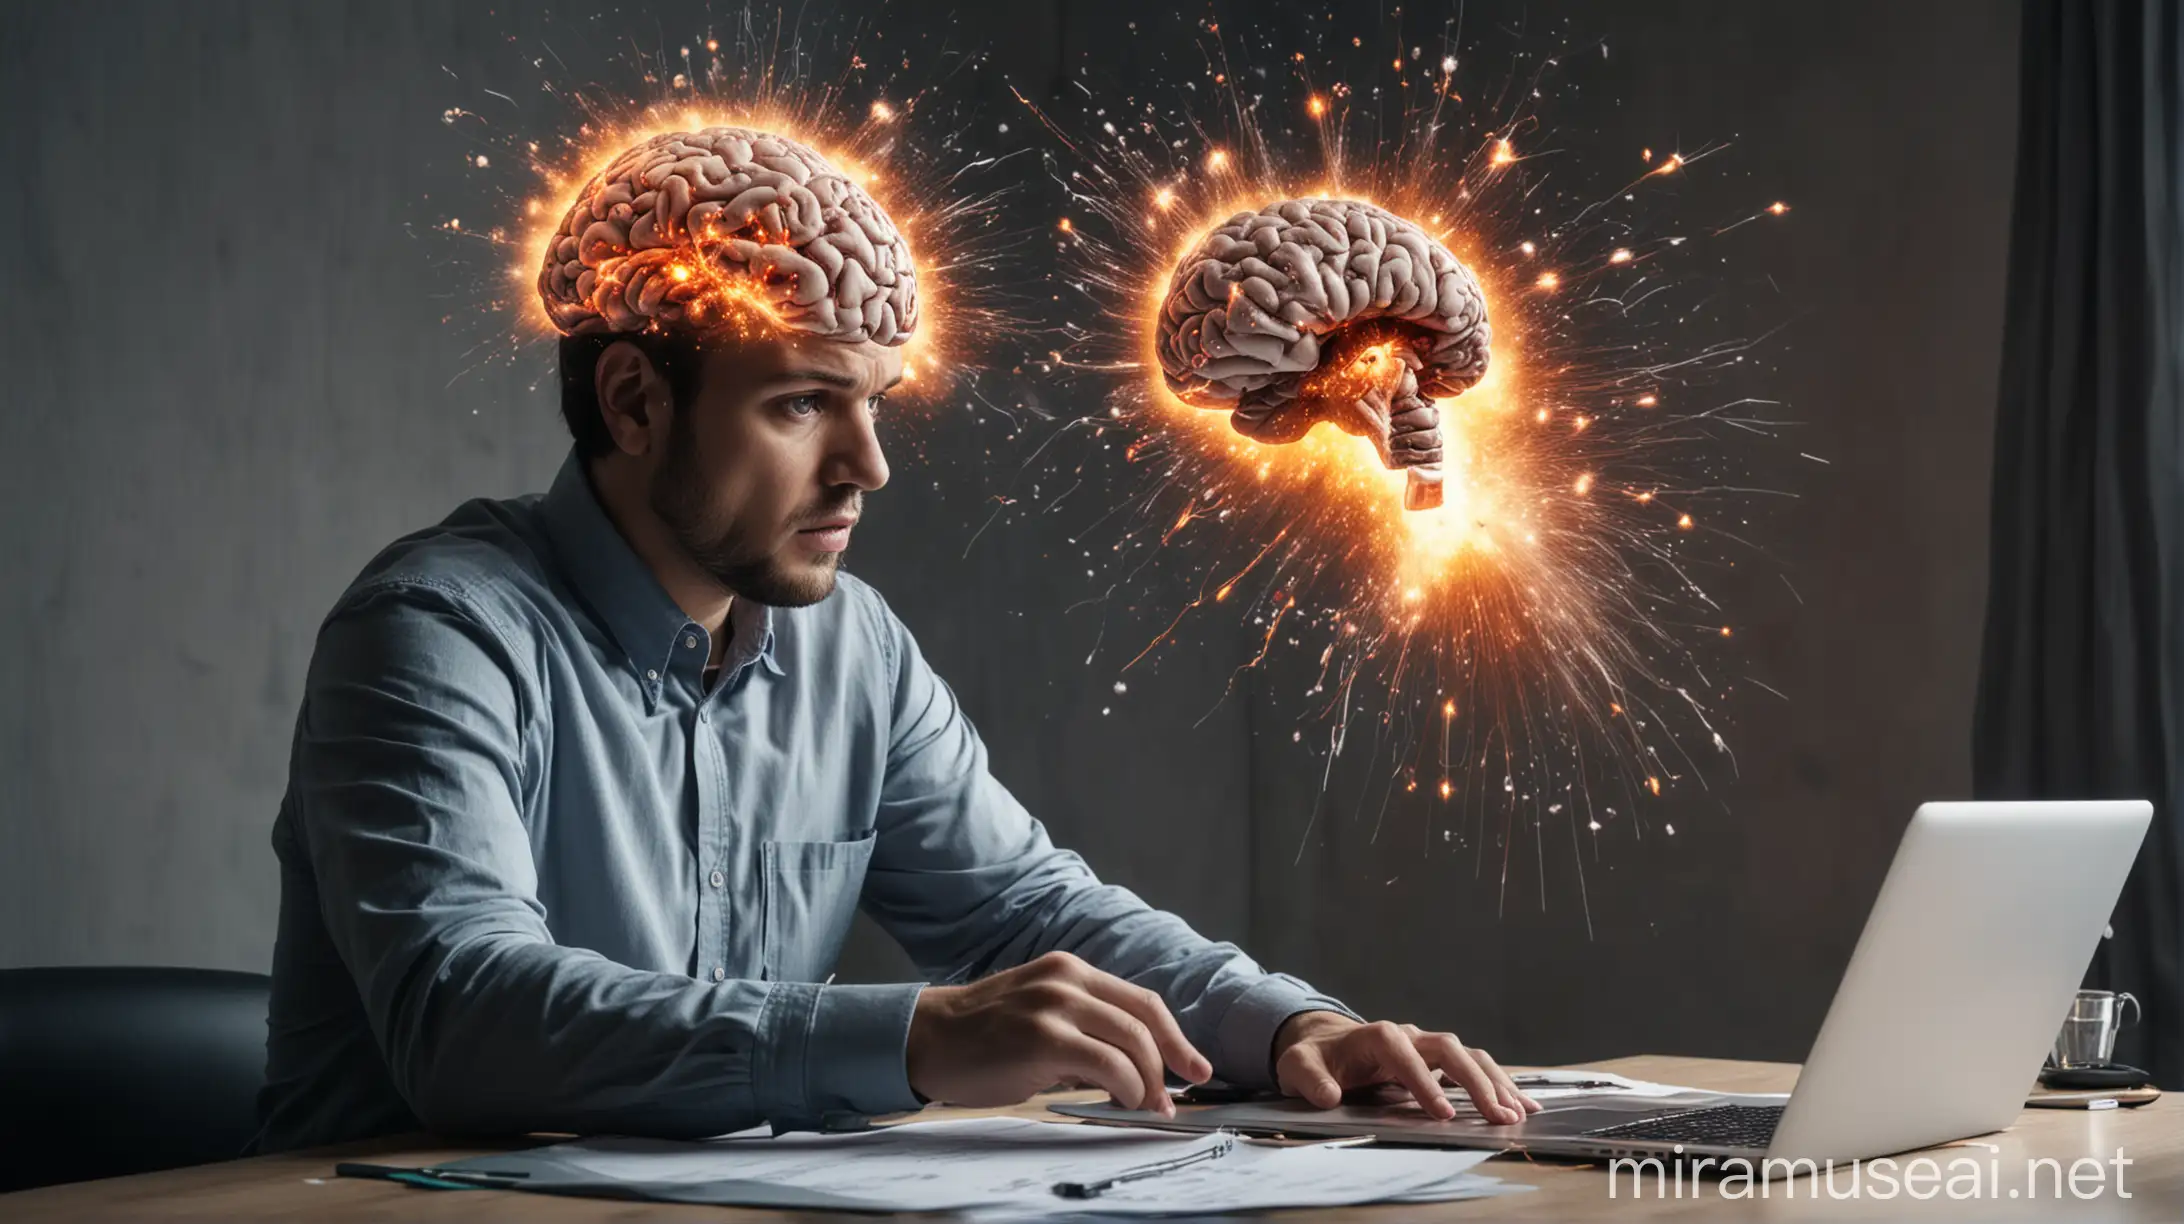 man sitting at desk in office and working on laptop, question mark on exploding brain, software code displayed on laptop screen